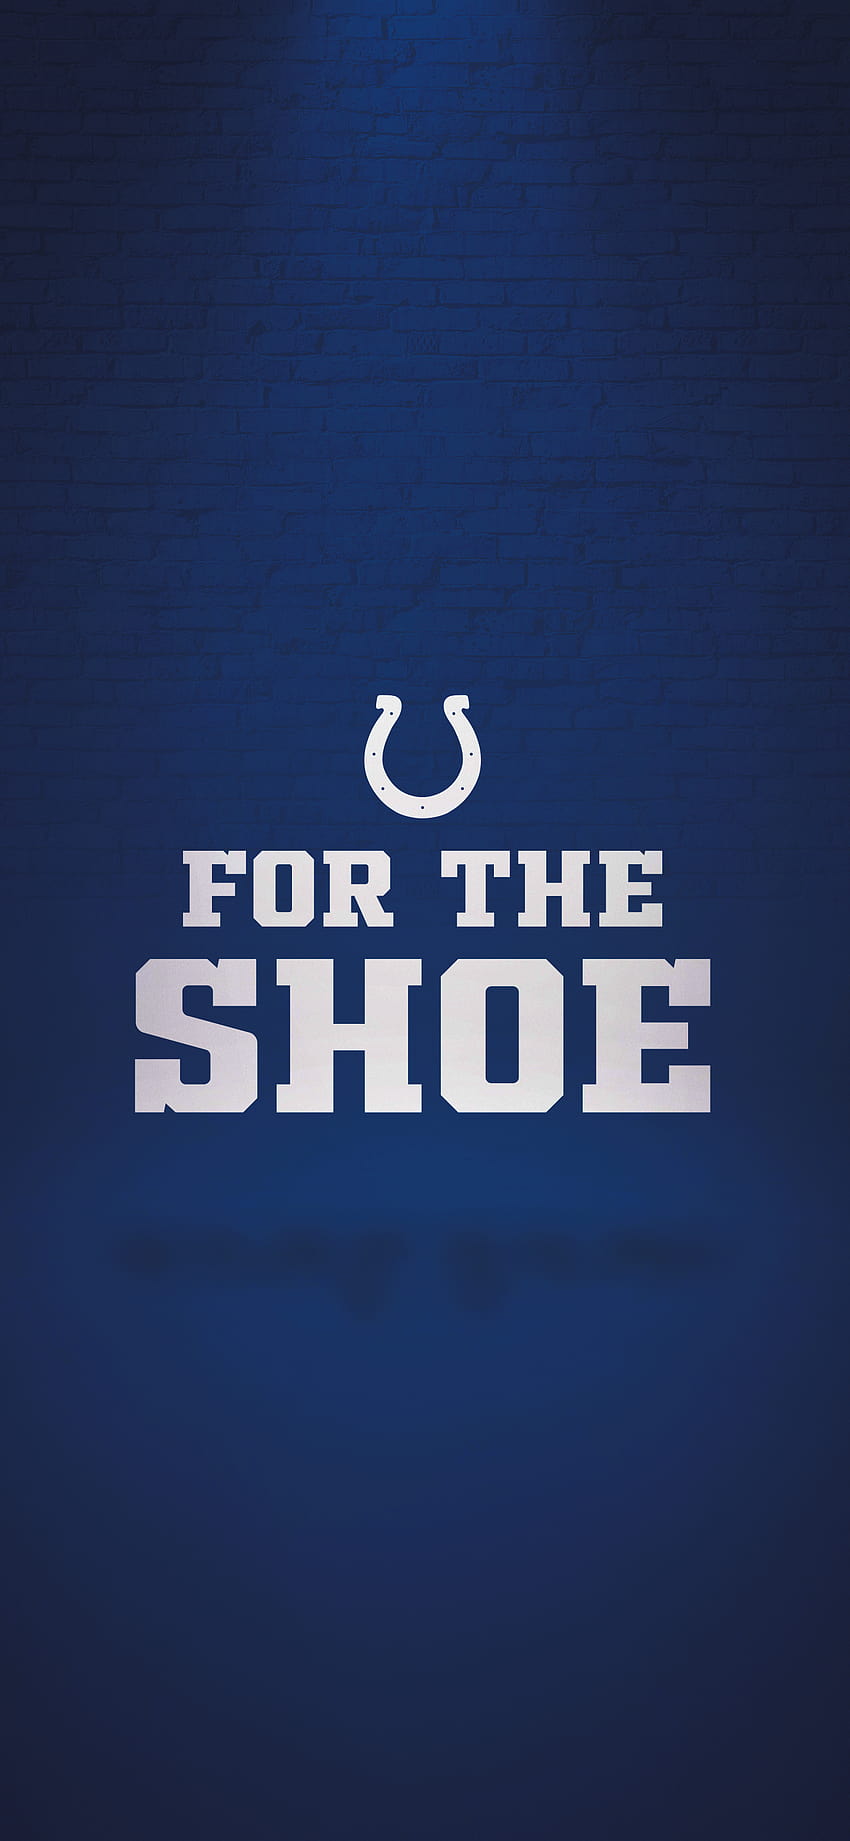 Indianapolis Colts on Twitter tombomb31 Ask and you shall receive a  cool new lock screen httpstcoEa3x7dAel0  Twitter